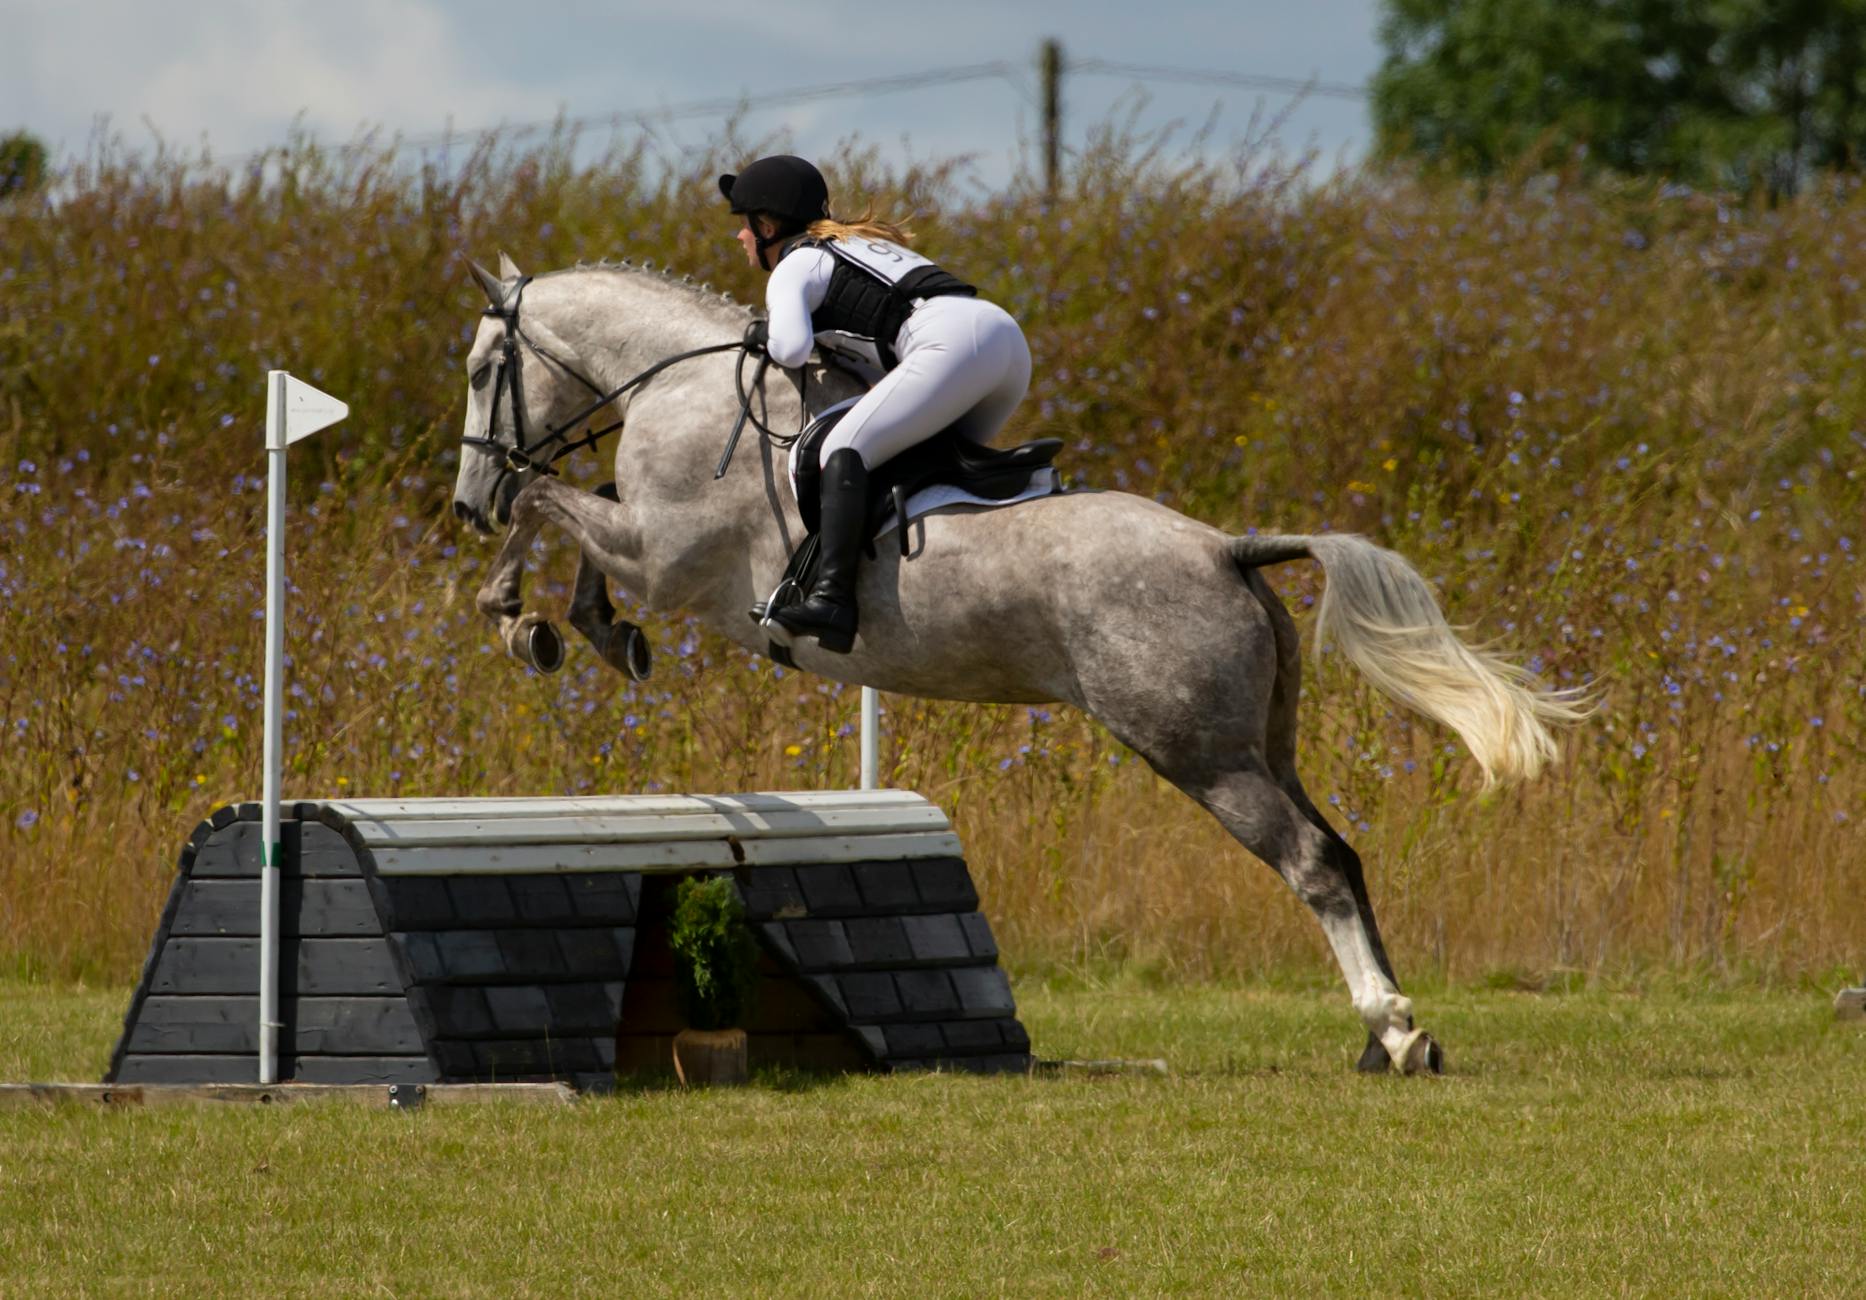 A Female Equestrian Competing in an Event